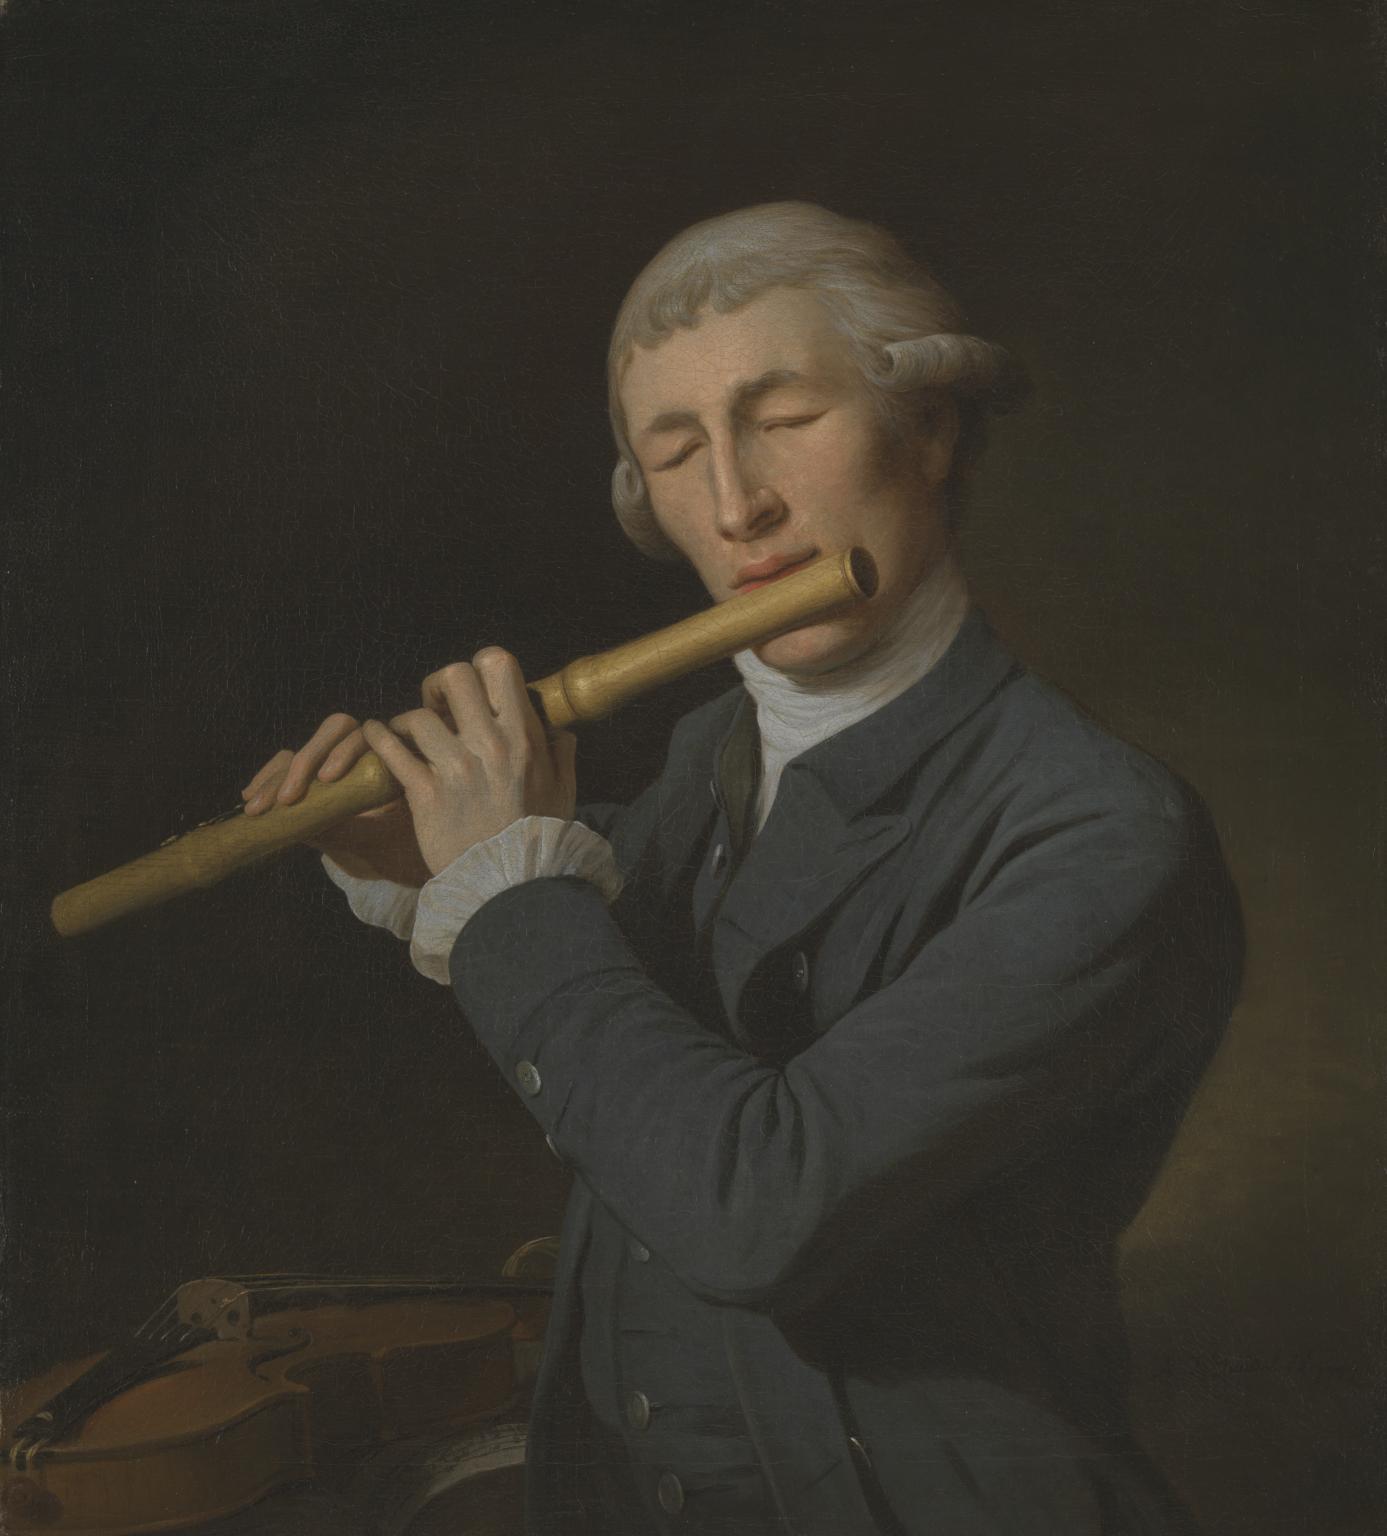 T14193: Portrait of a Man playing a Flute